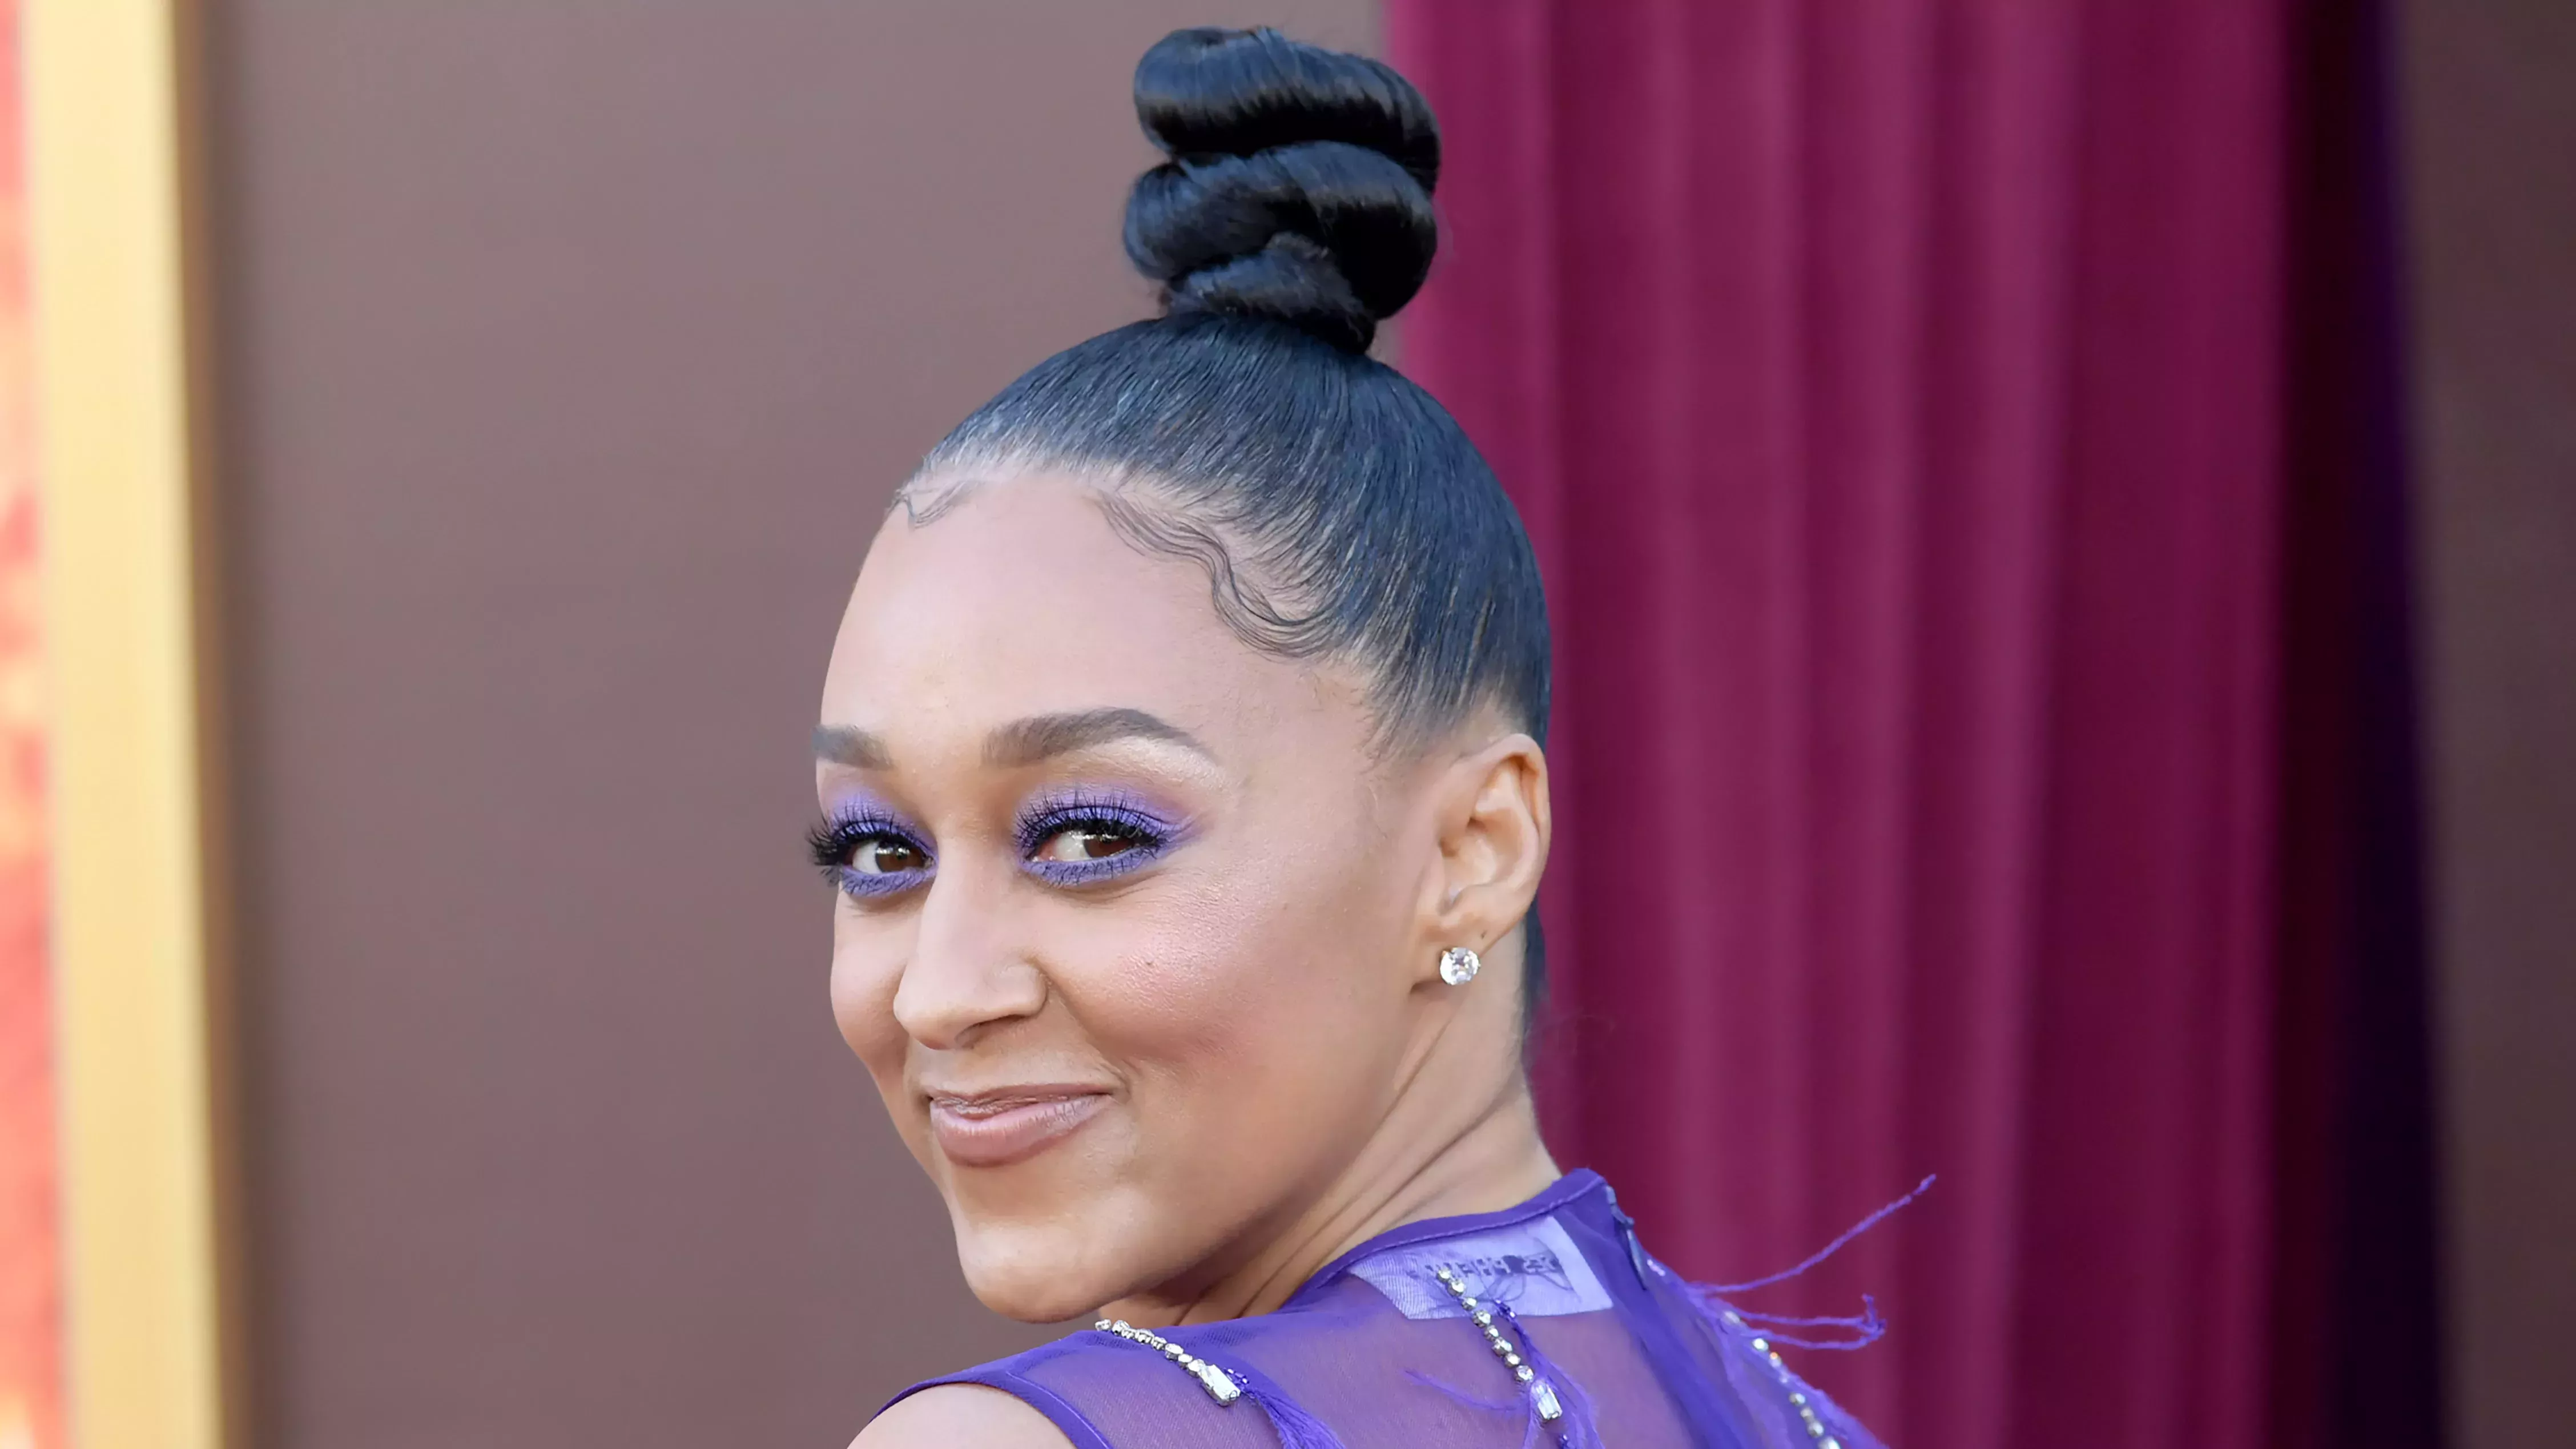 Tia Mowry. Micro trenzas caramelo hasta los muslos. That's All I Need to Say